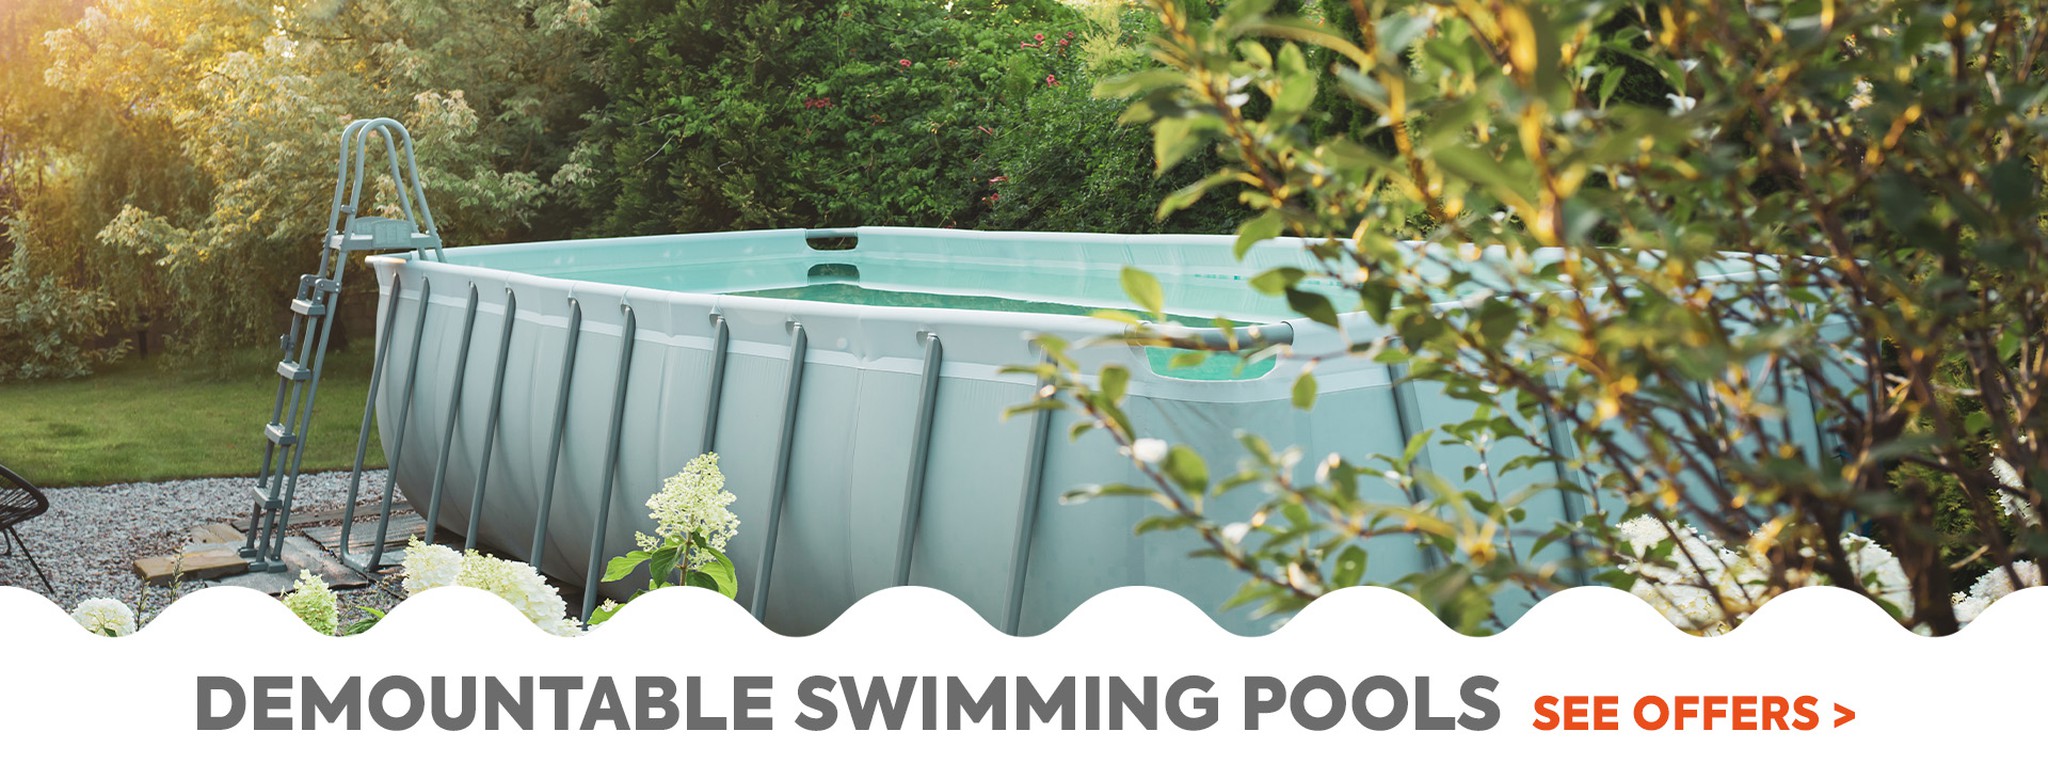 Discover our range of swimming pools and enjoy your garden this summer.